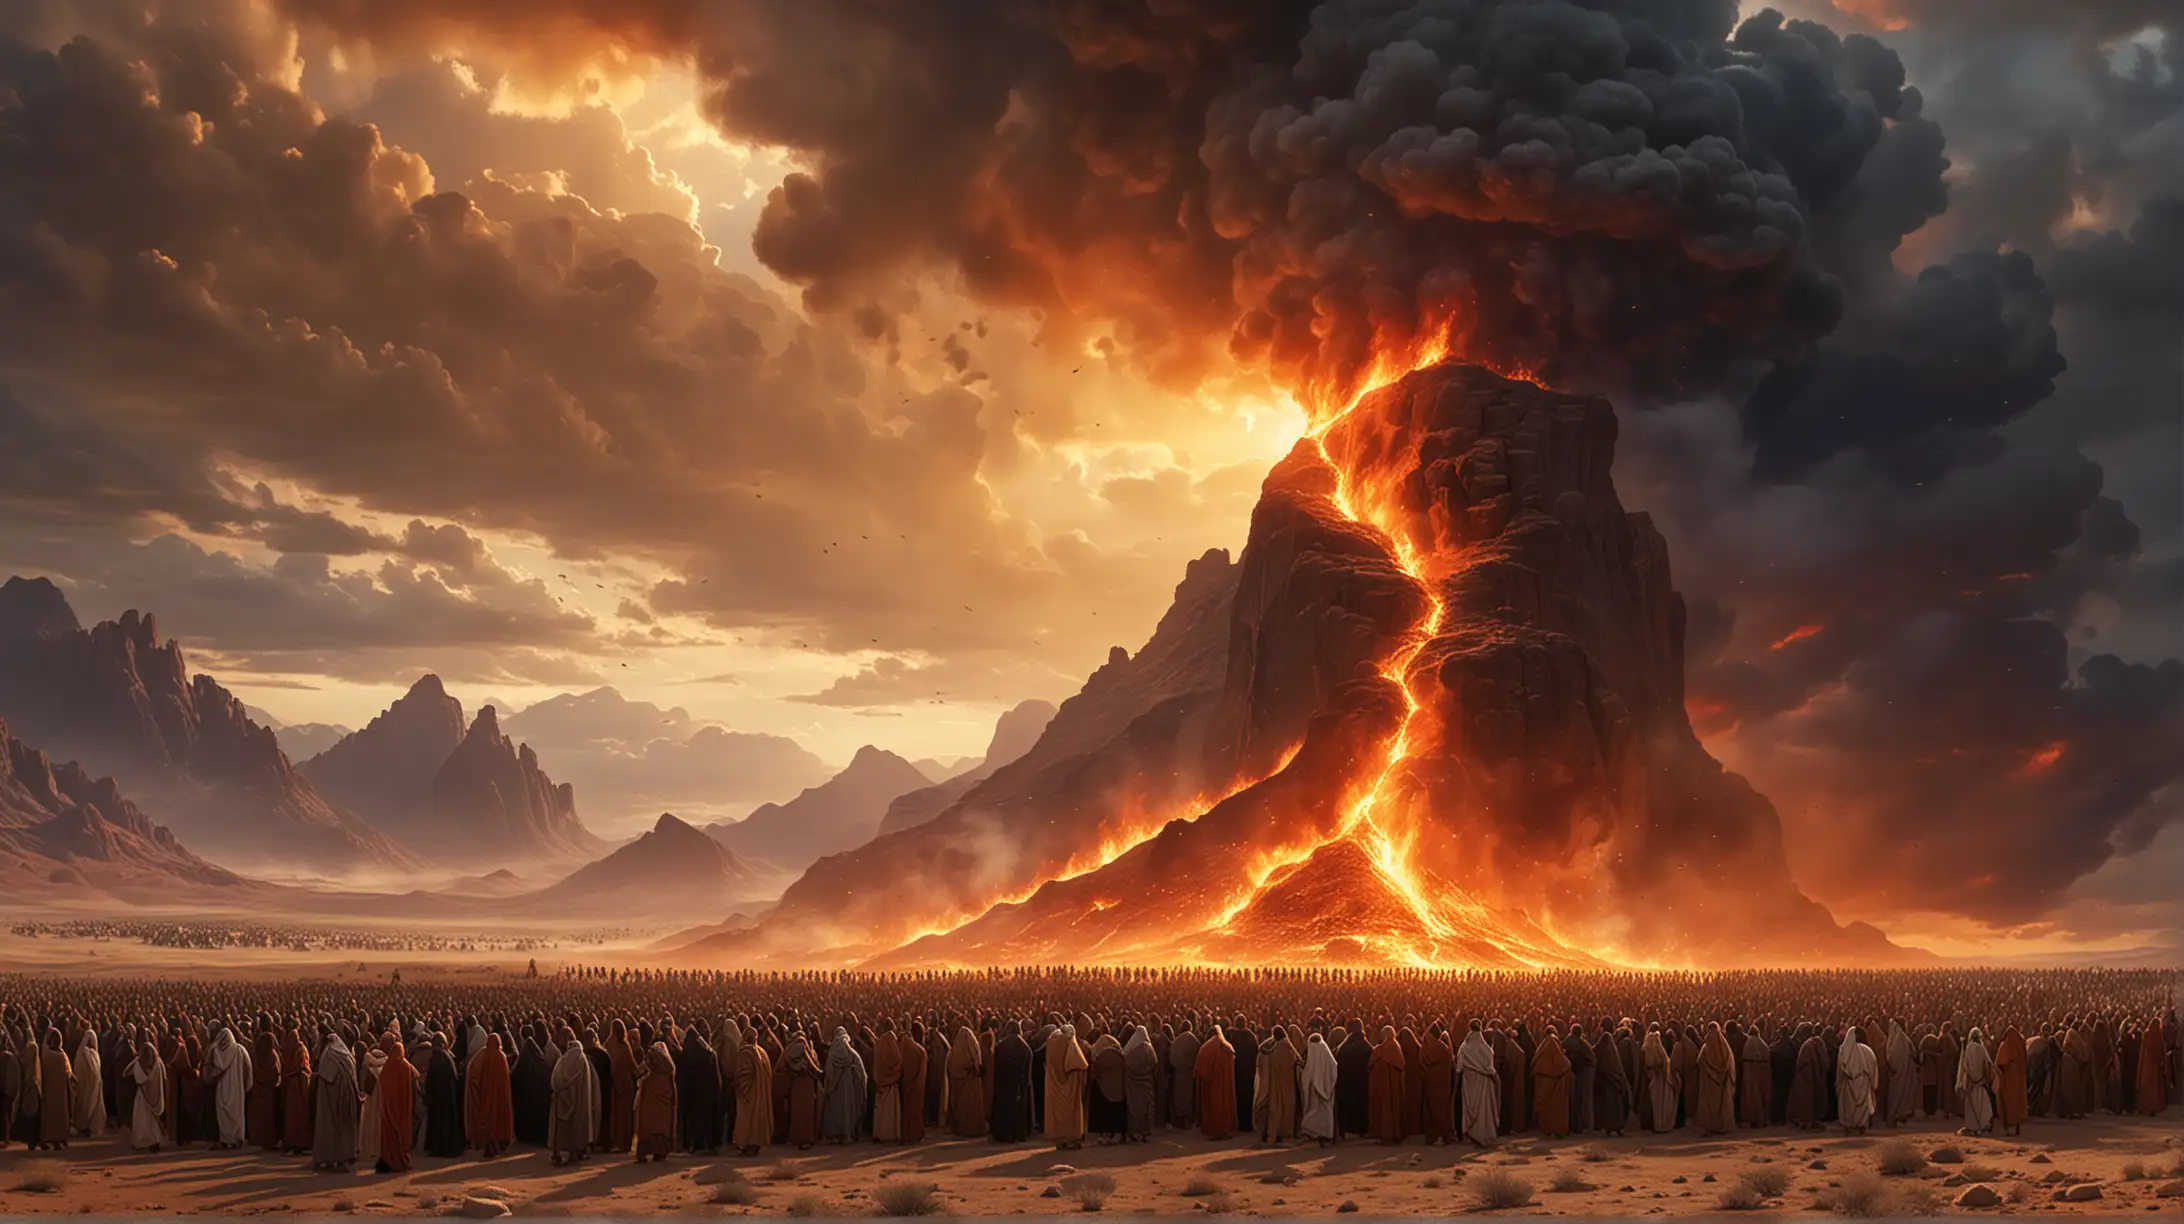 Crowd in Desert with Fiery Mountain Biblical Moses Era Gathering